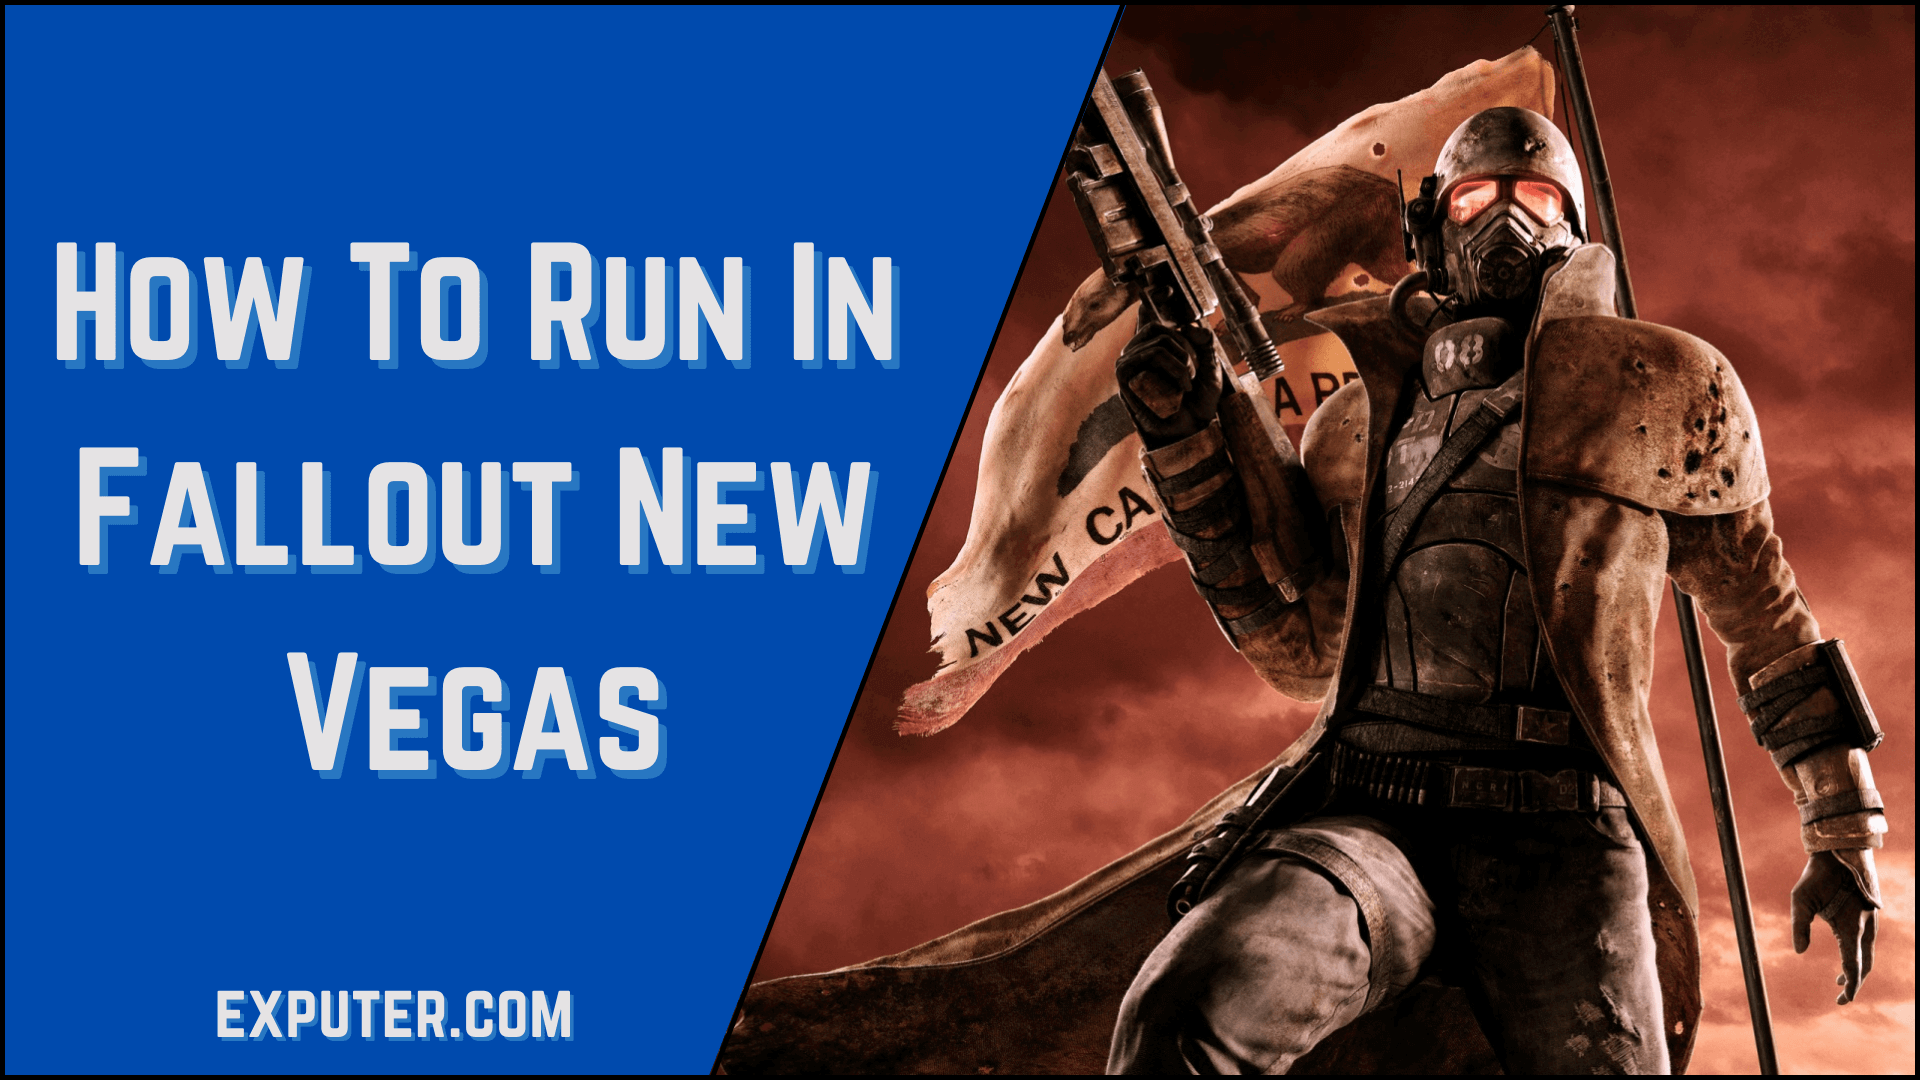 How To Run In Fallout New Vegas